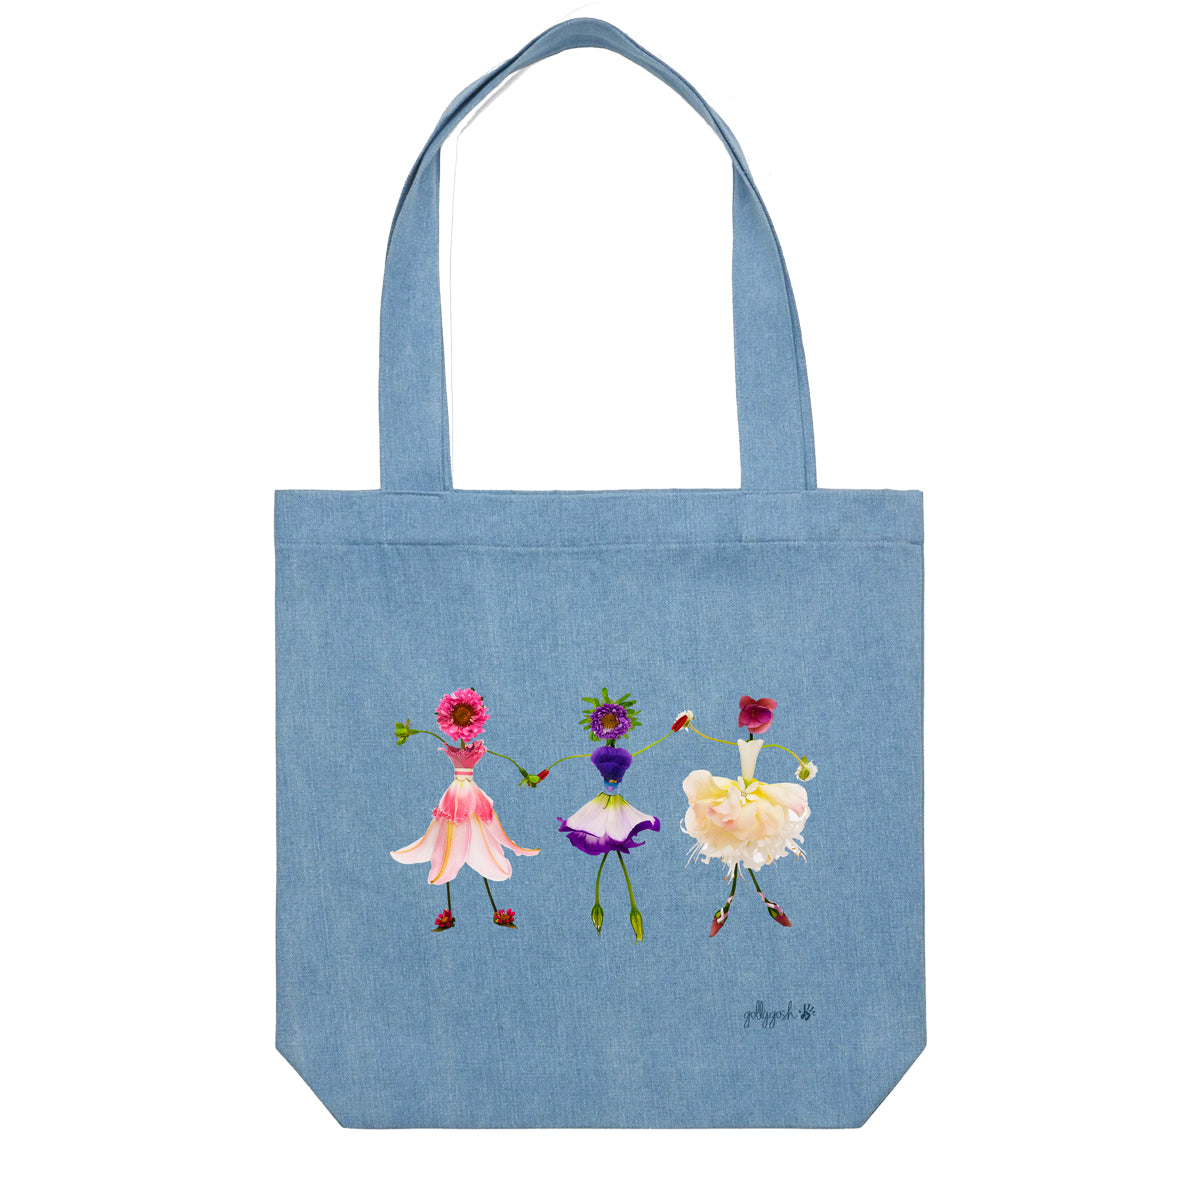 Cotton Canvas Tote Bag - Dancing Girls 1 | GOLLY GOSH — GOLLY GOSH GIFTS